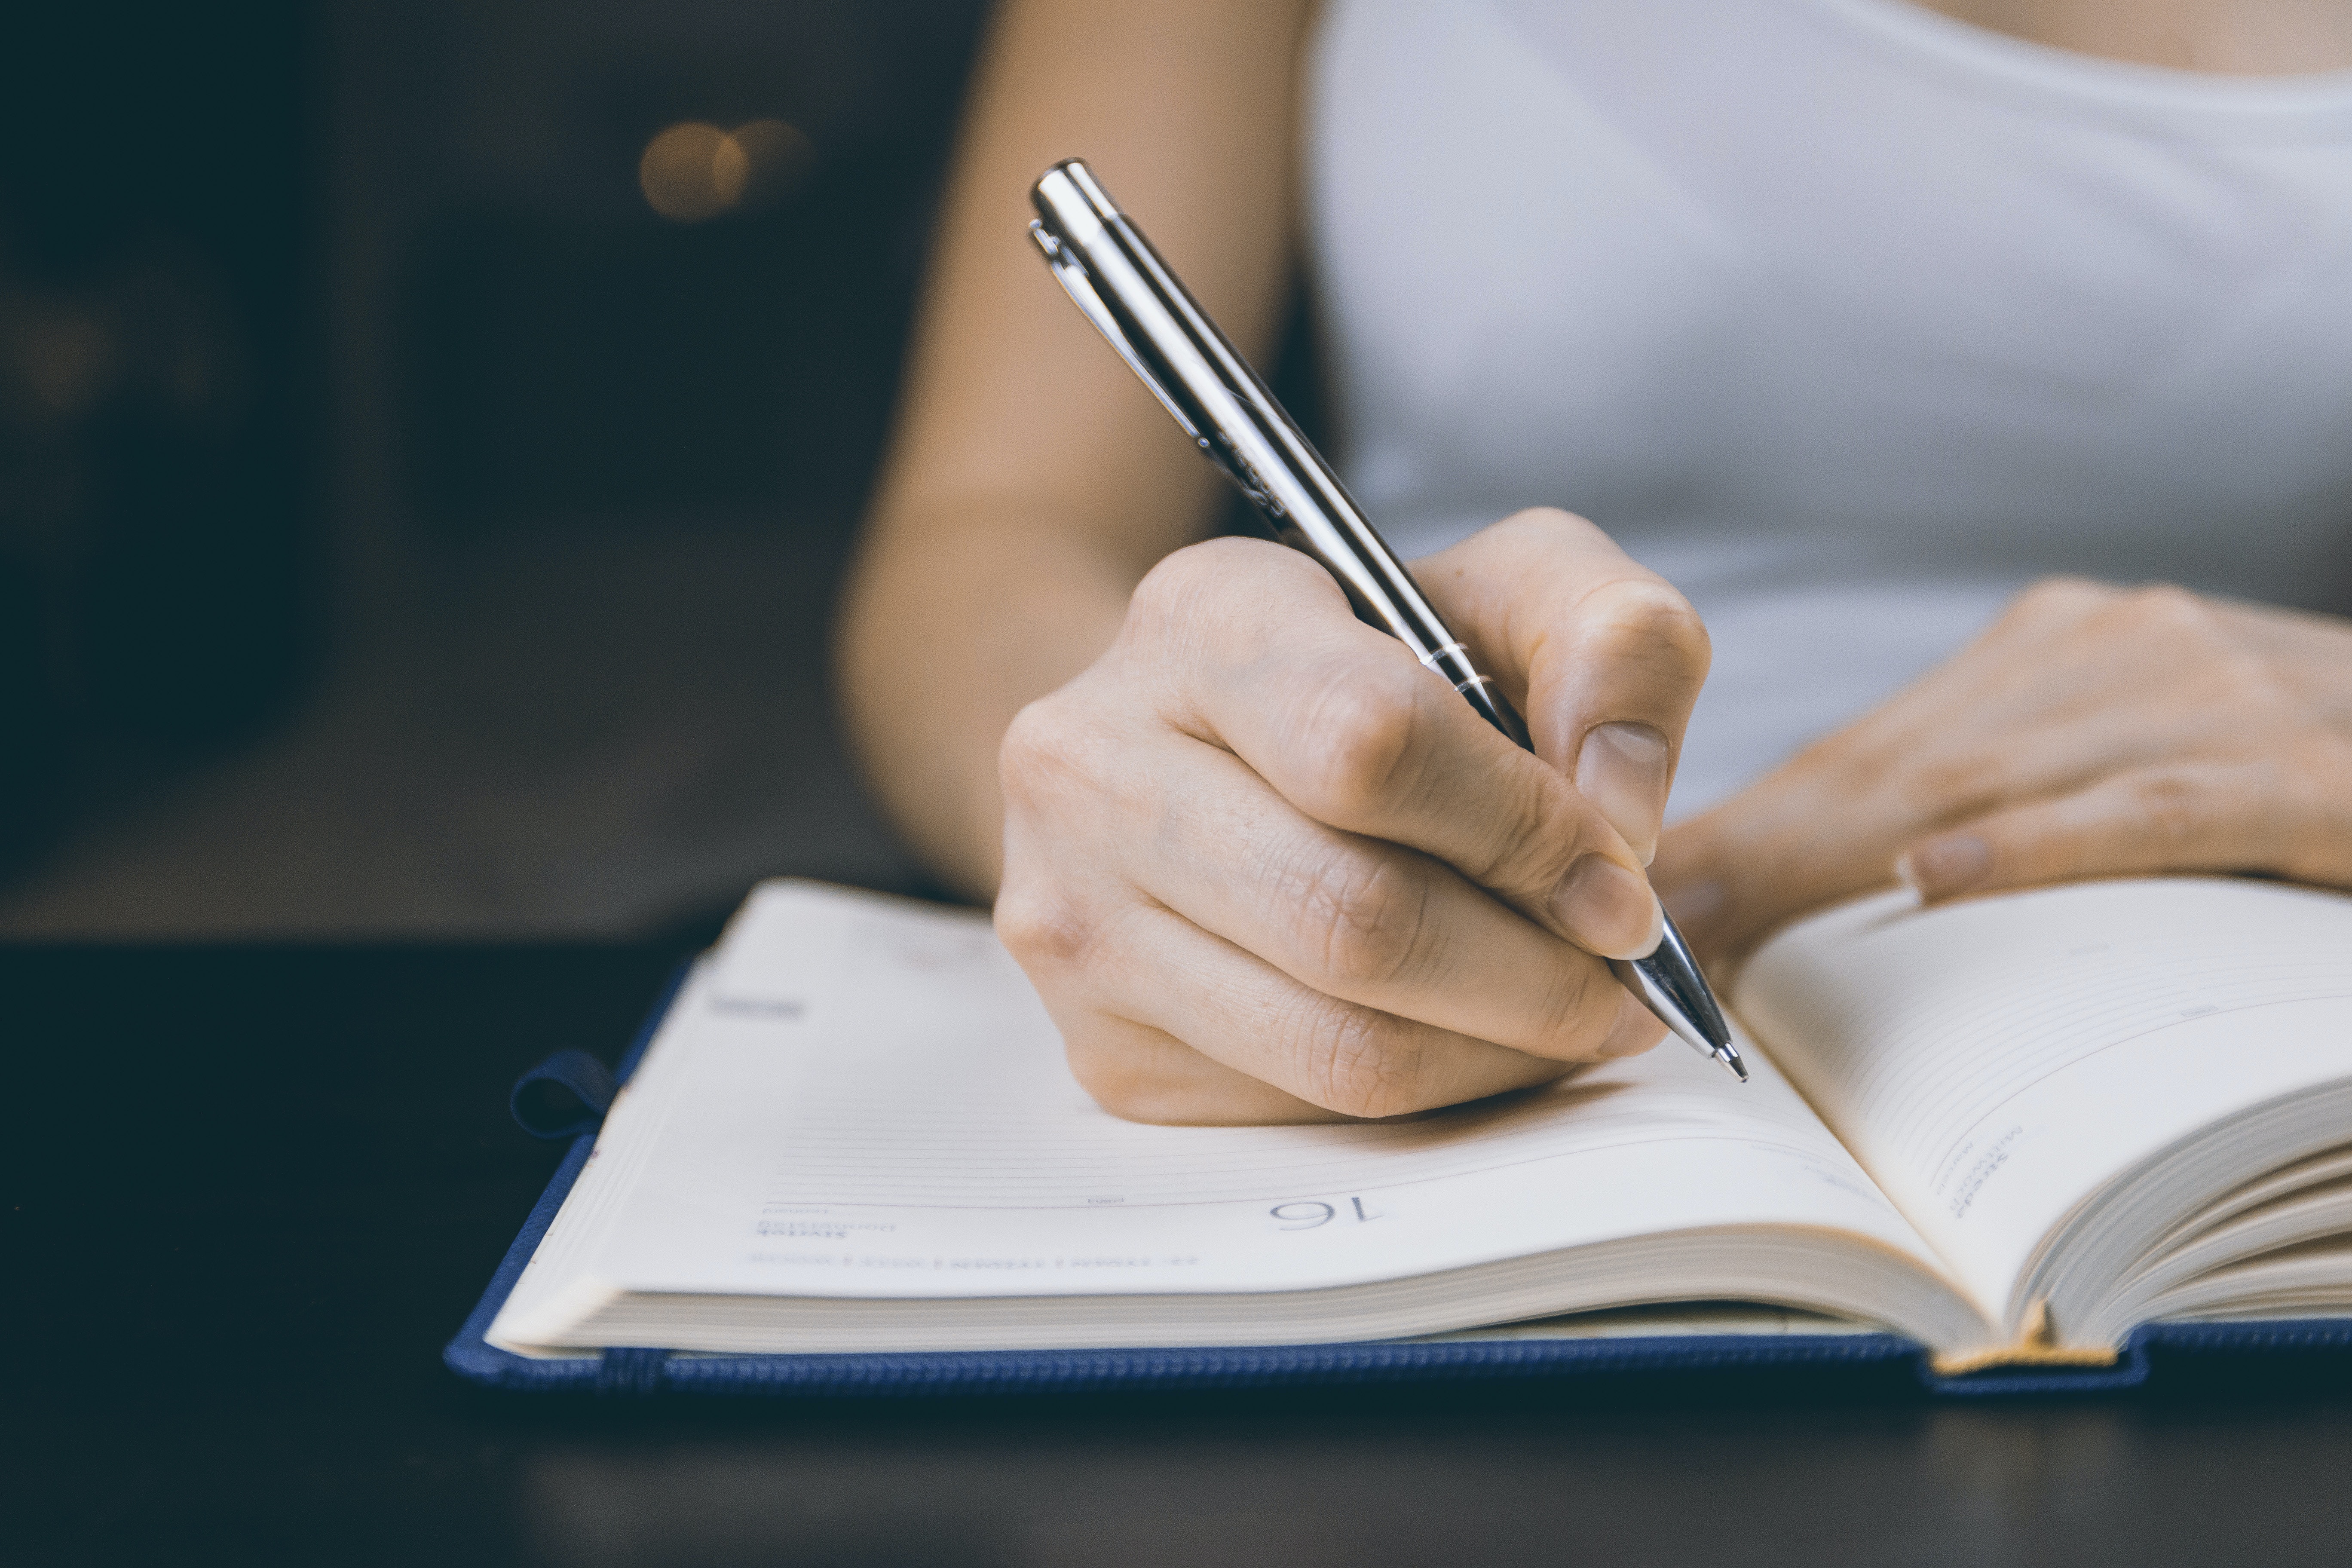 Close up of a woman writing on a notebook  | Source: Pexels